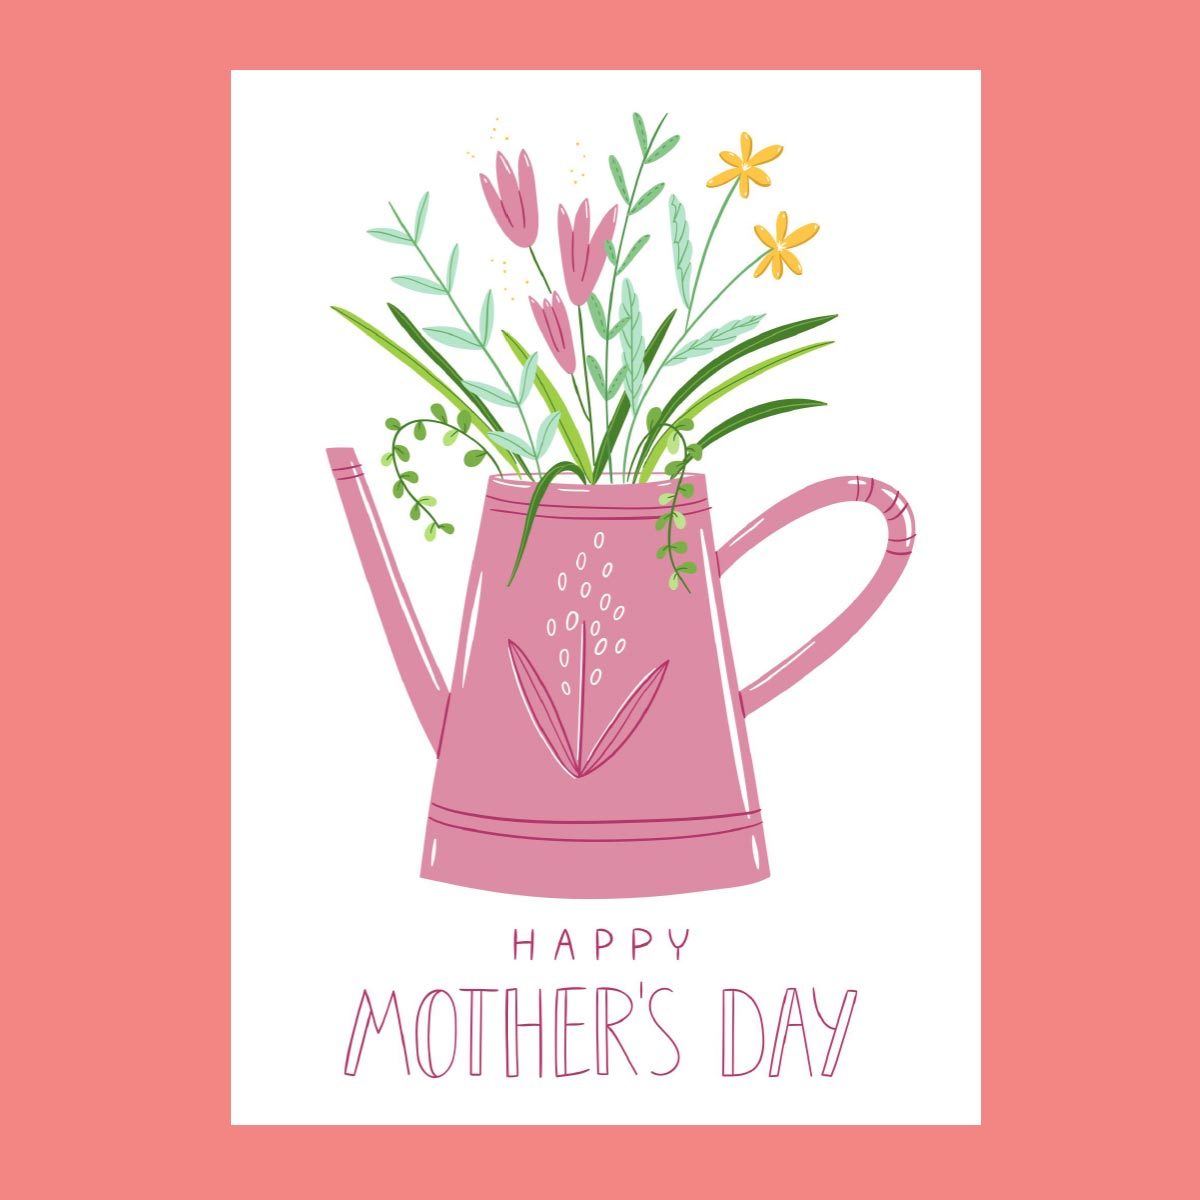 Printable Mother's Day Card Greetings Card Periodic 